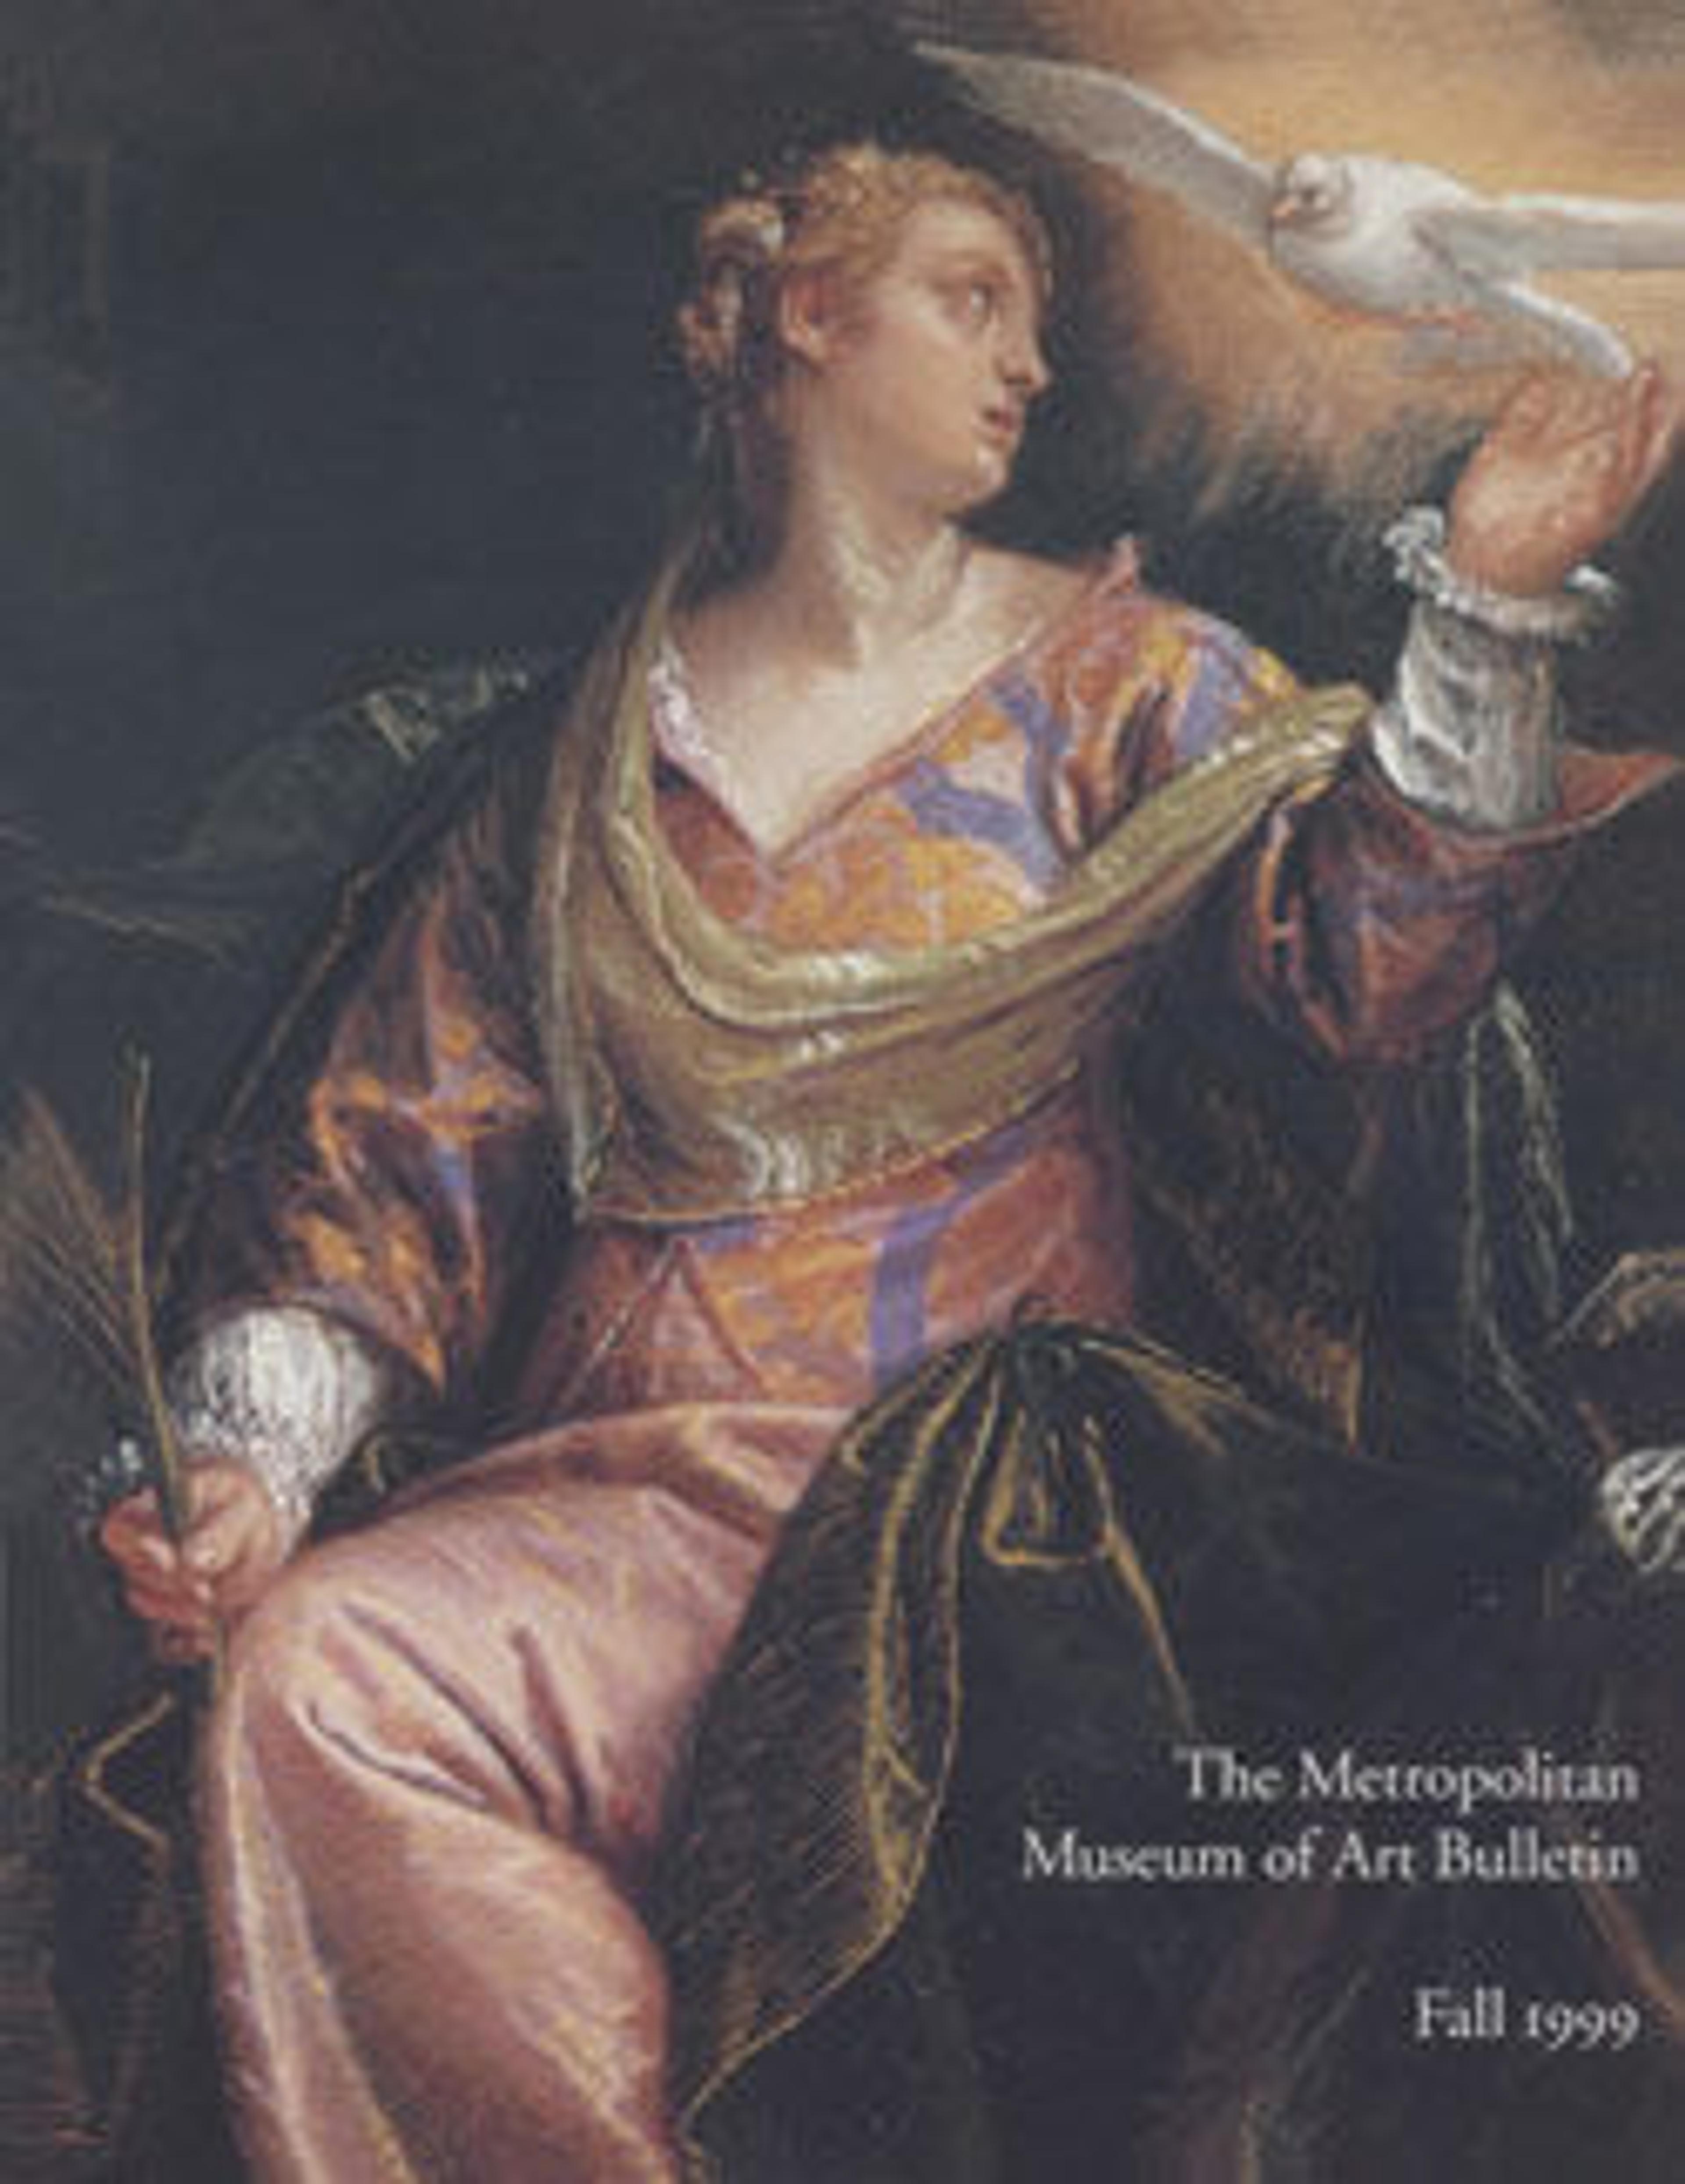 "Recent Acquisitions, A Selection: 1998-1999": The Metropolitan Museum of Art Bulletin, v. 57, no. 2 (Fall, 1999)